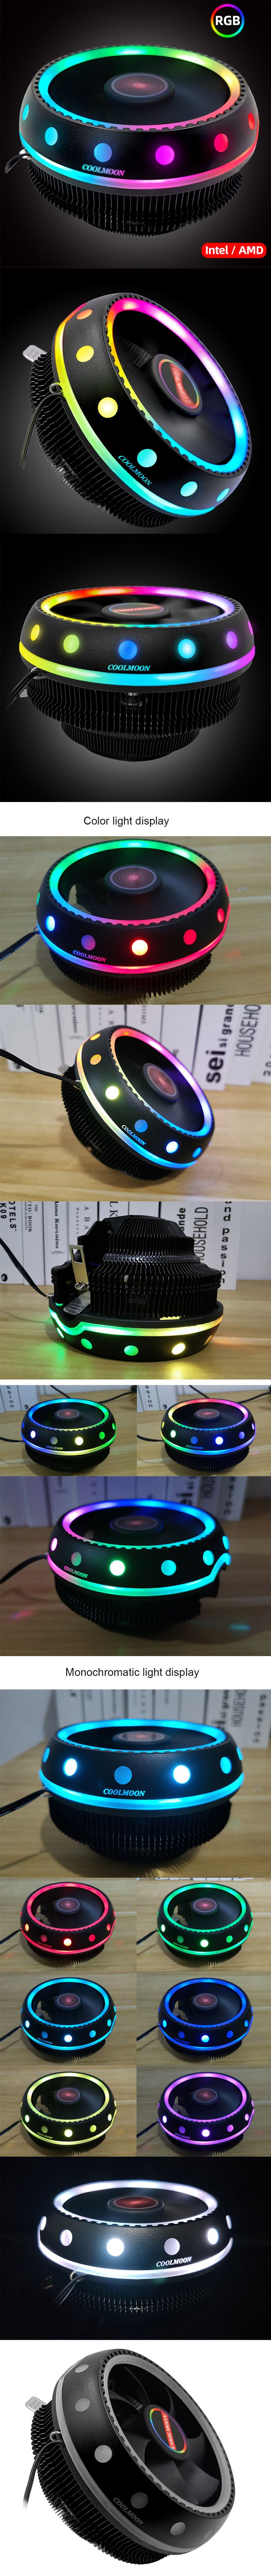 Coolmoon-DC-12V-3Pin-UFO-Colorful-Backlight-100mm-CPU-Cooling-Fan-PC-Heatsink-for-IntelAMD-For-PC-Co-1580115